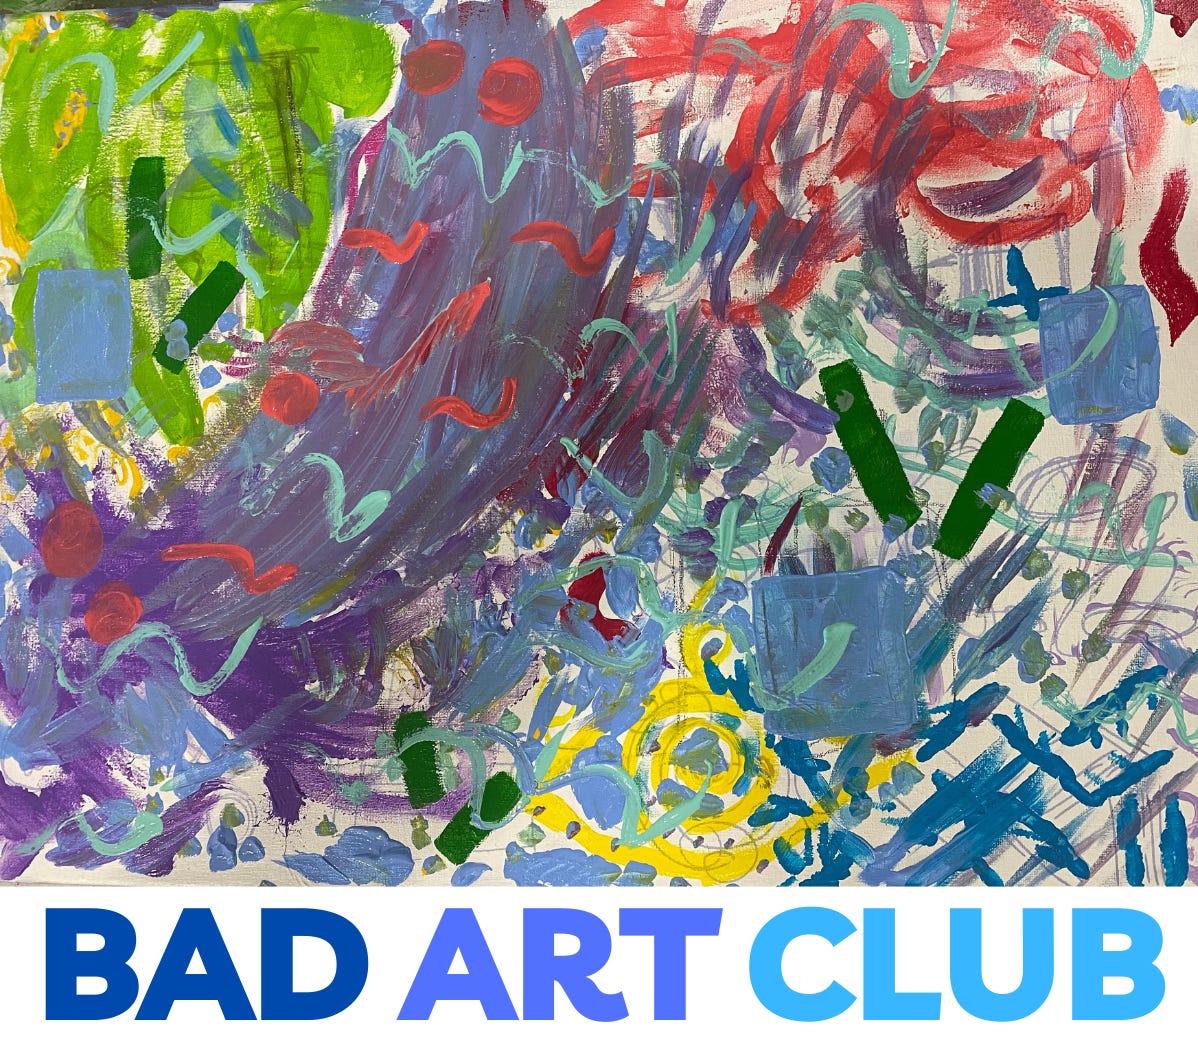 I canvas covered with lots of colors and markings including blue, green, purple, yellow, and red sections. Bad Art Club is written in purple and bluea at the bottom.